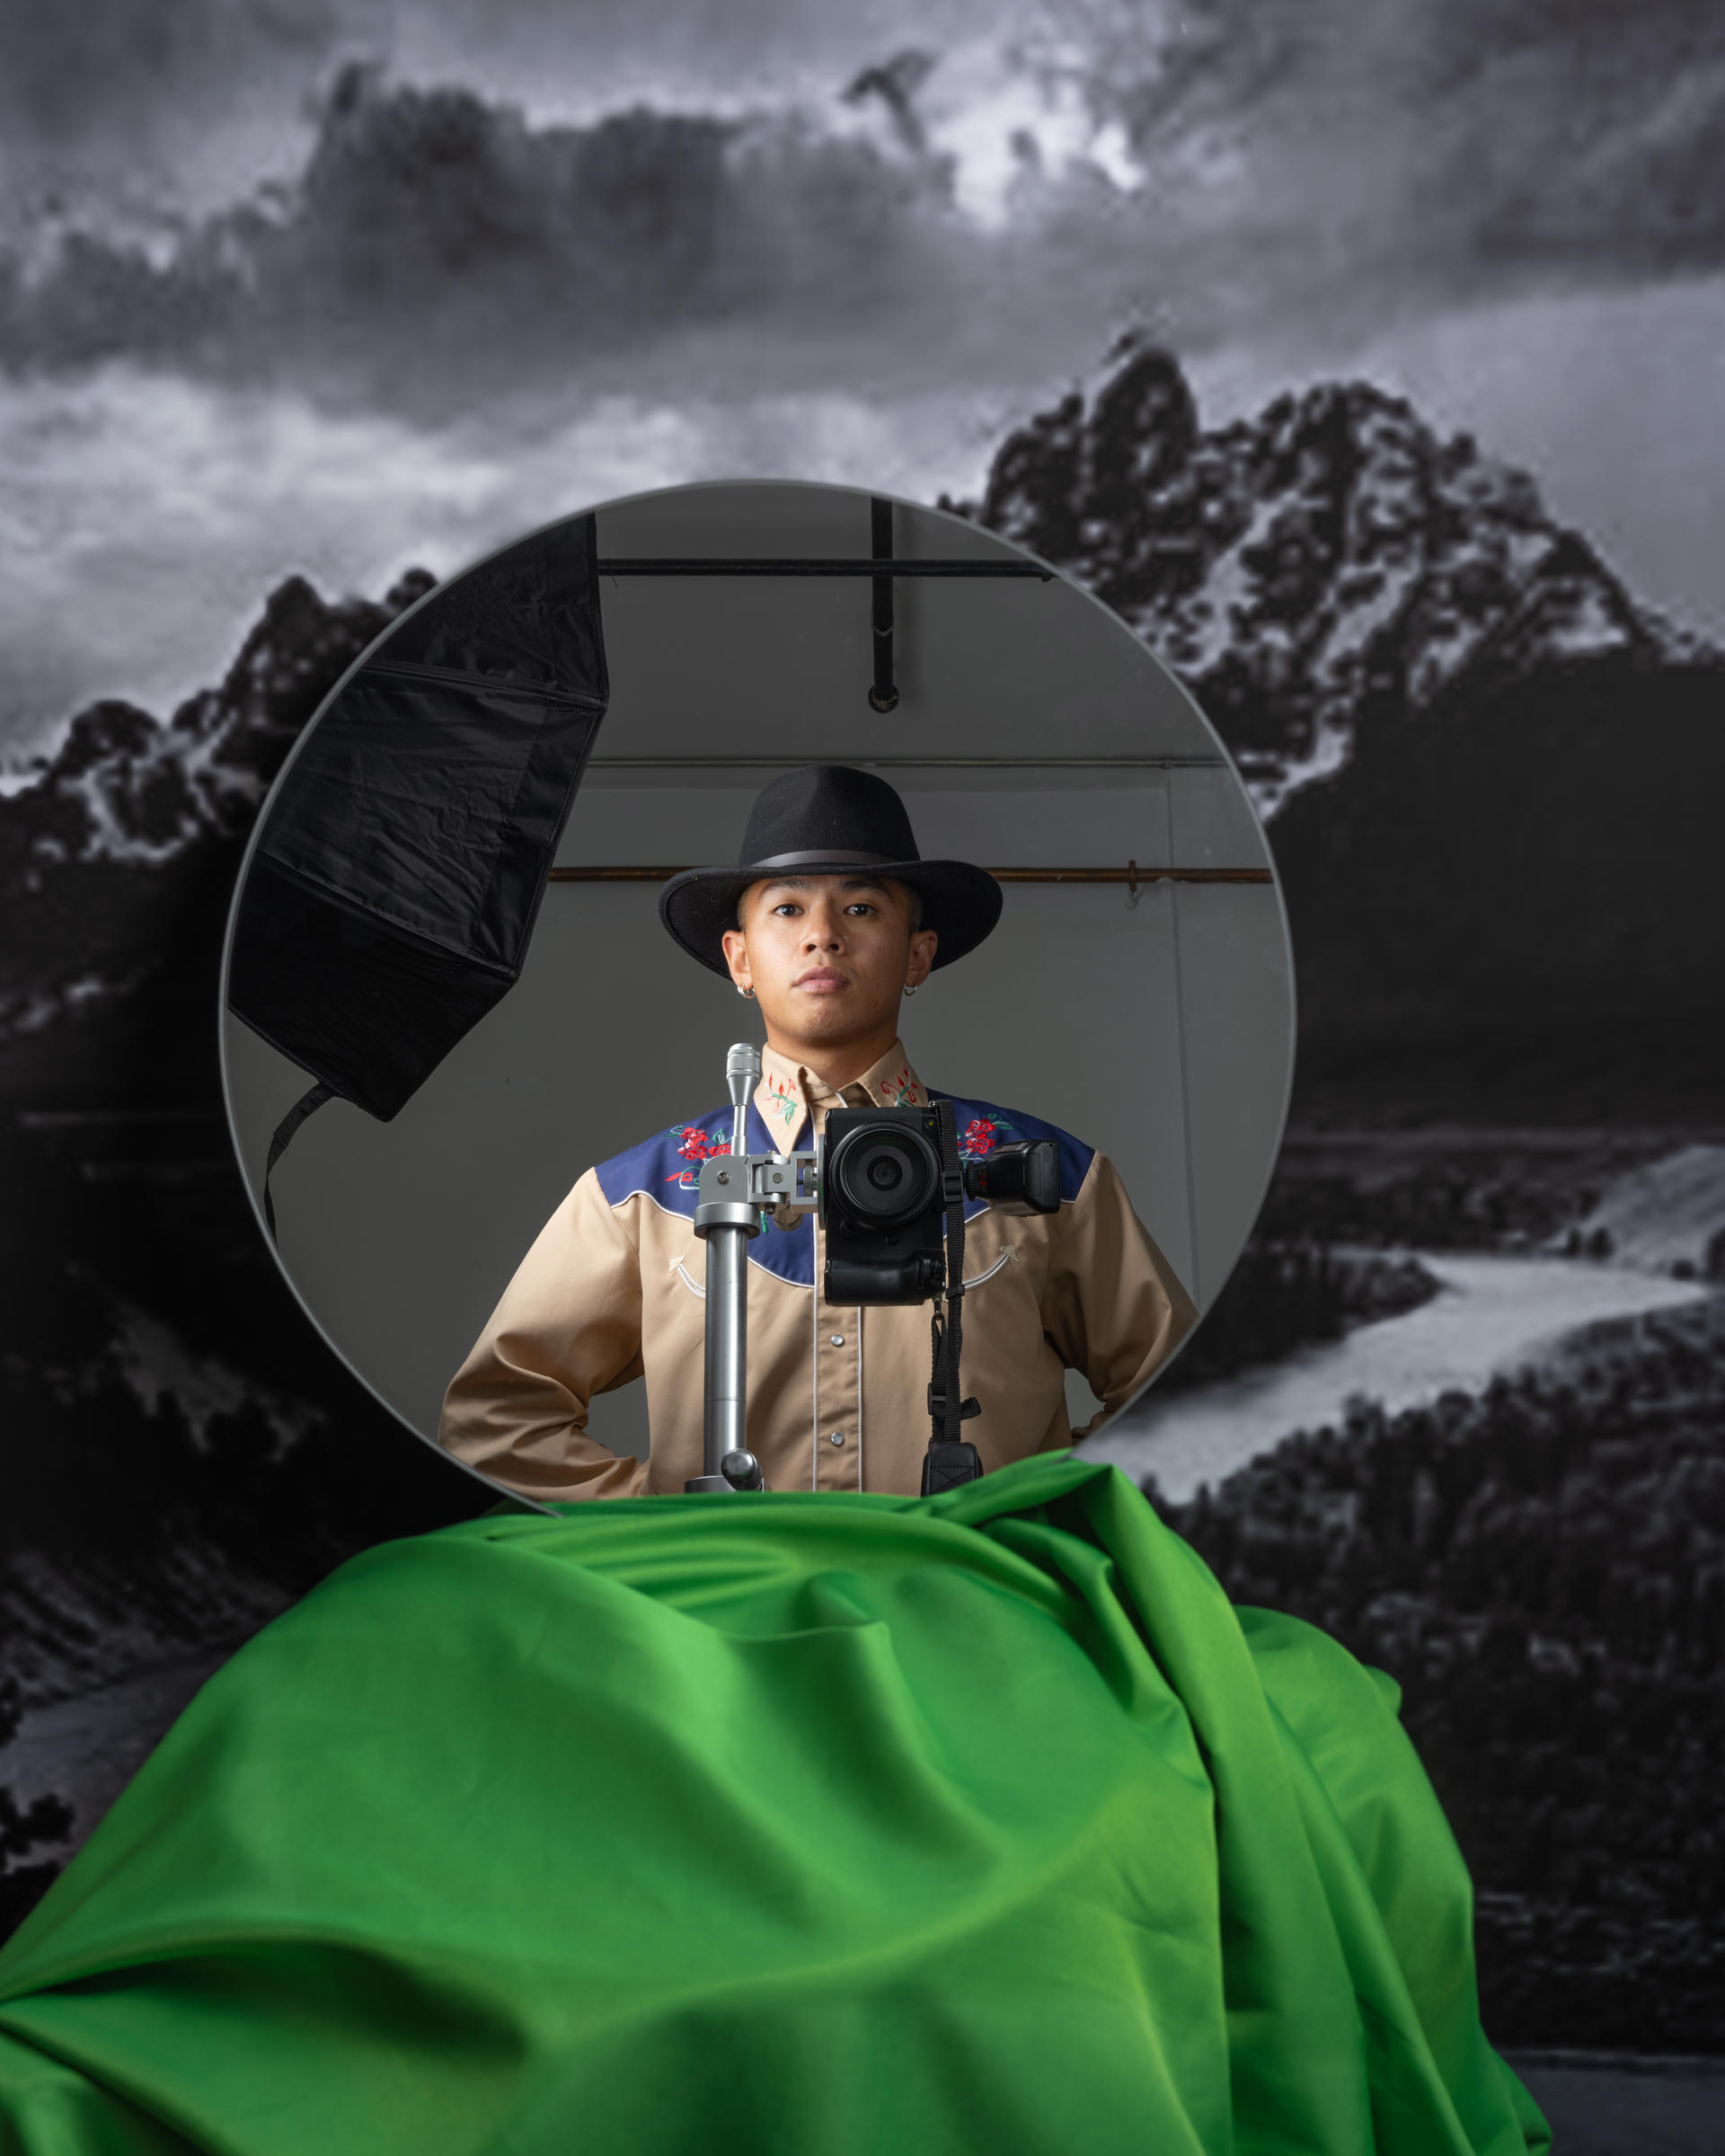 A mirror shows a cowboy standing behind a mounted camera. The mirror is propped against a print of an Ansel Adams landscape.